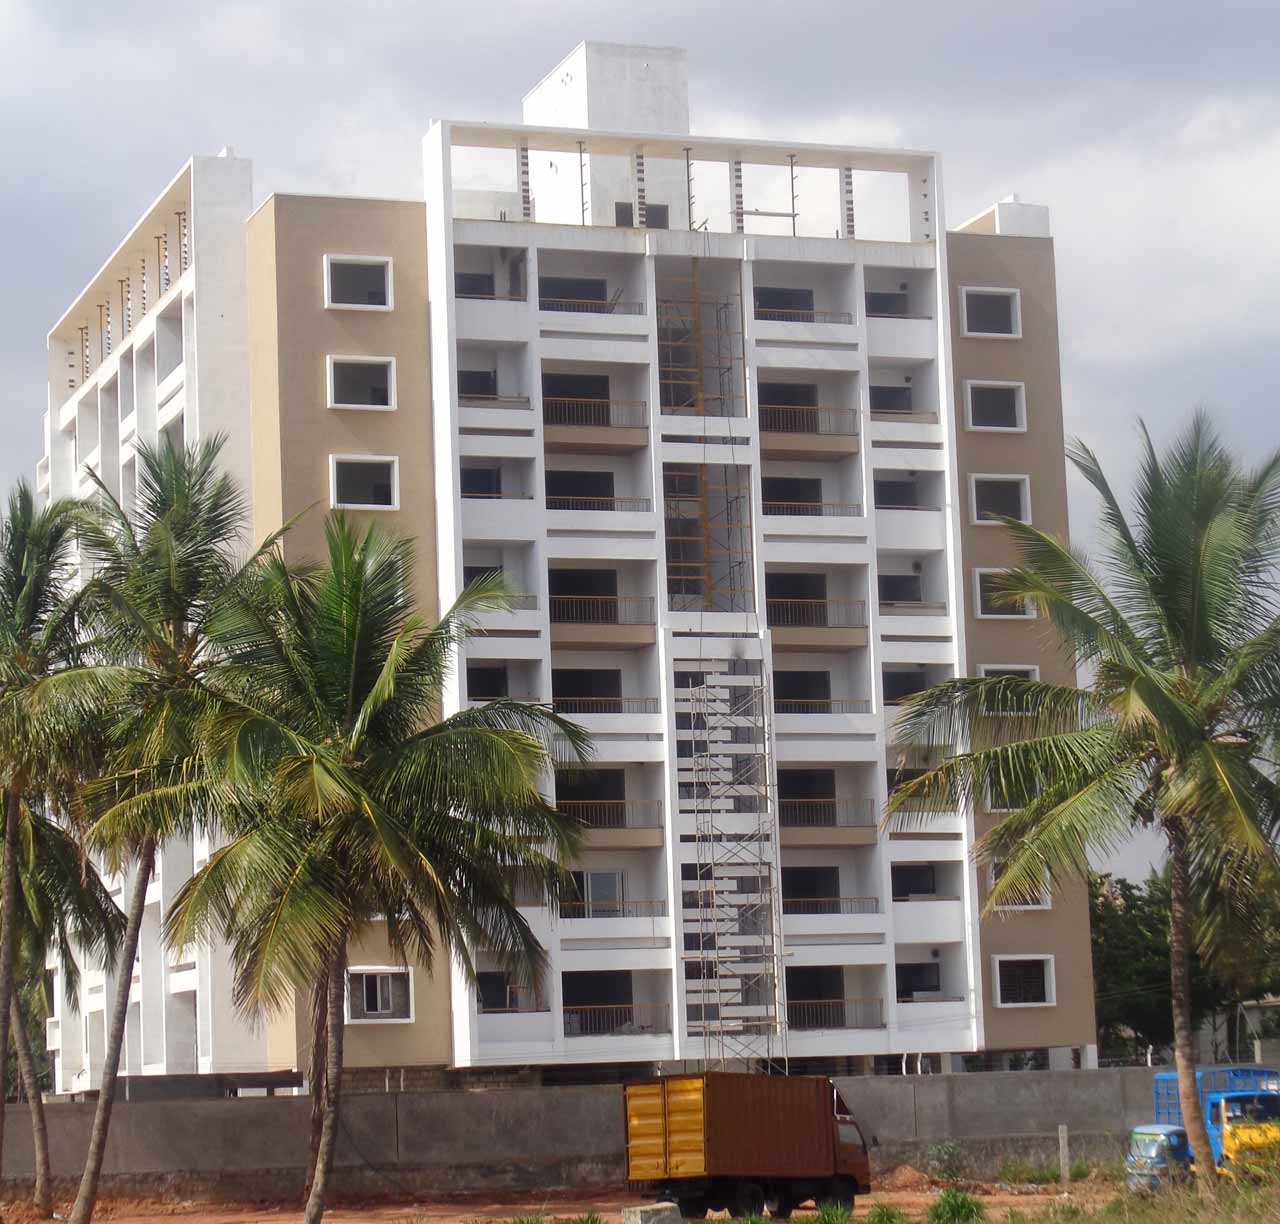 Divyasree Serene Nest comprises 72 apartments -cozy, compact and just perfect for you Update